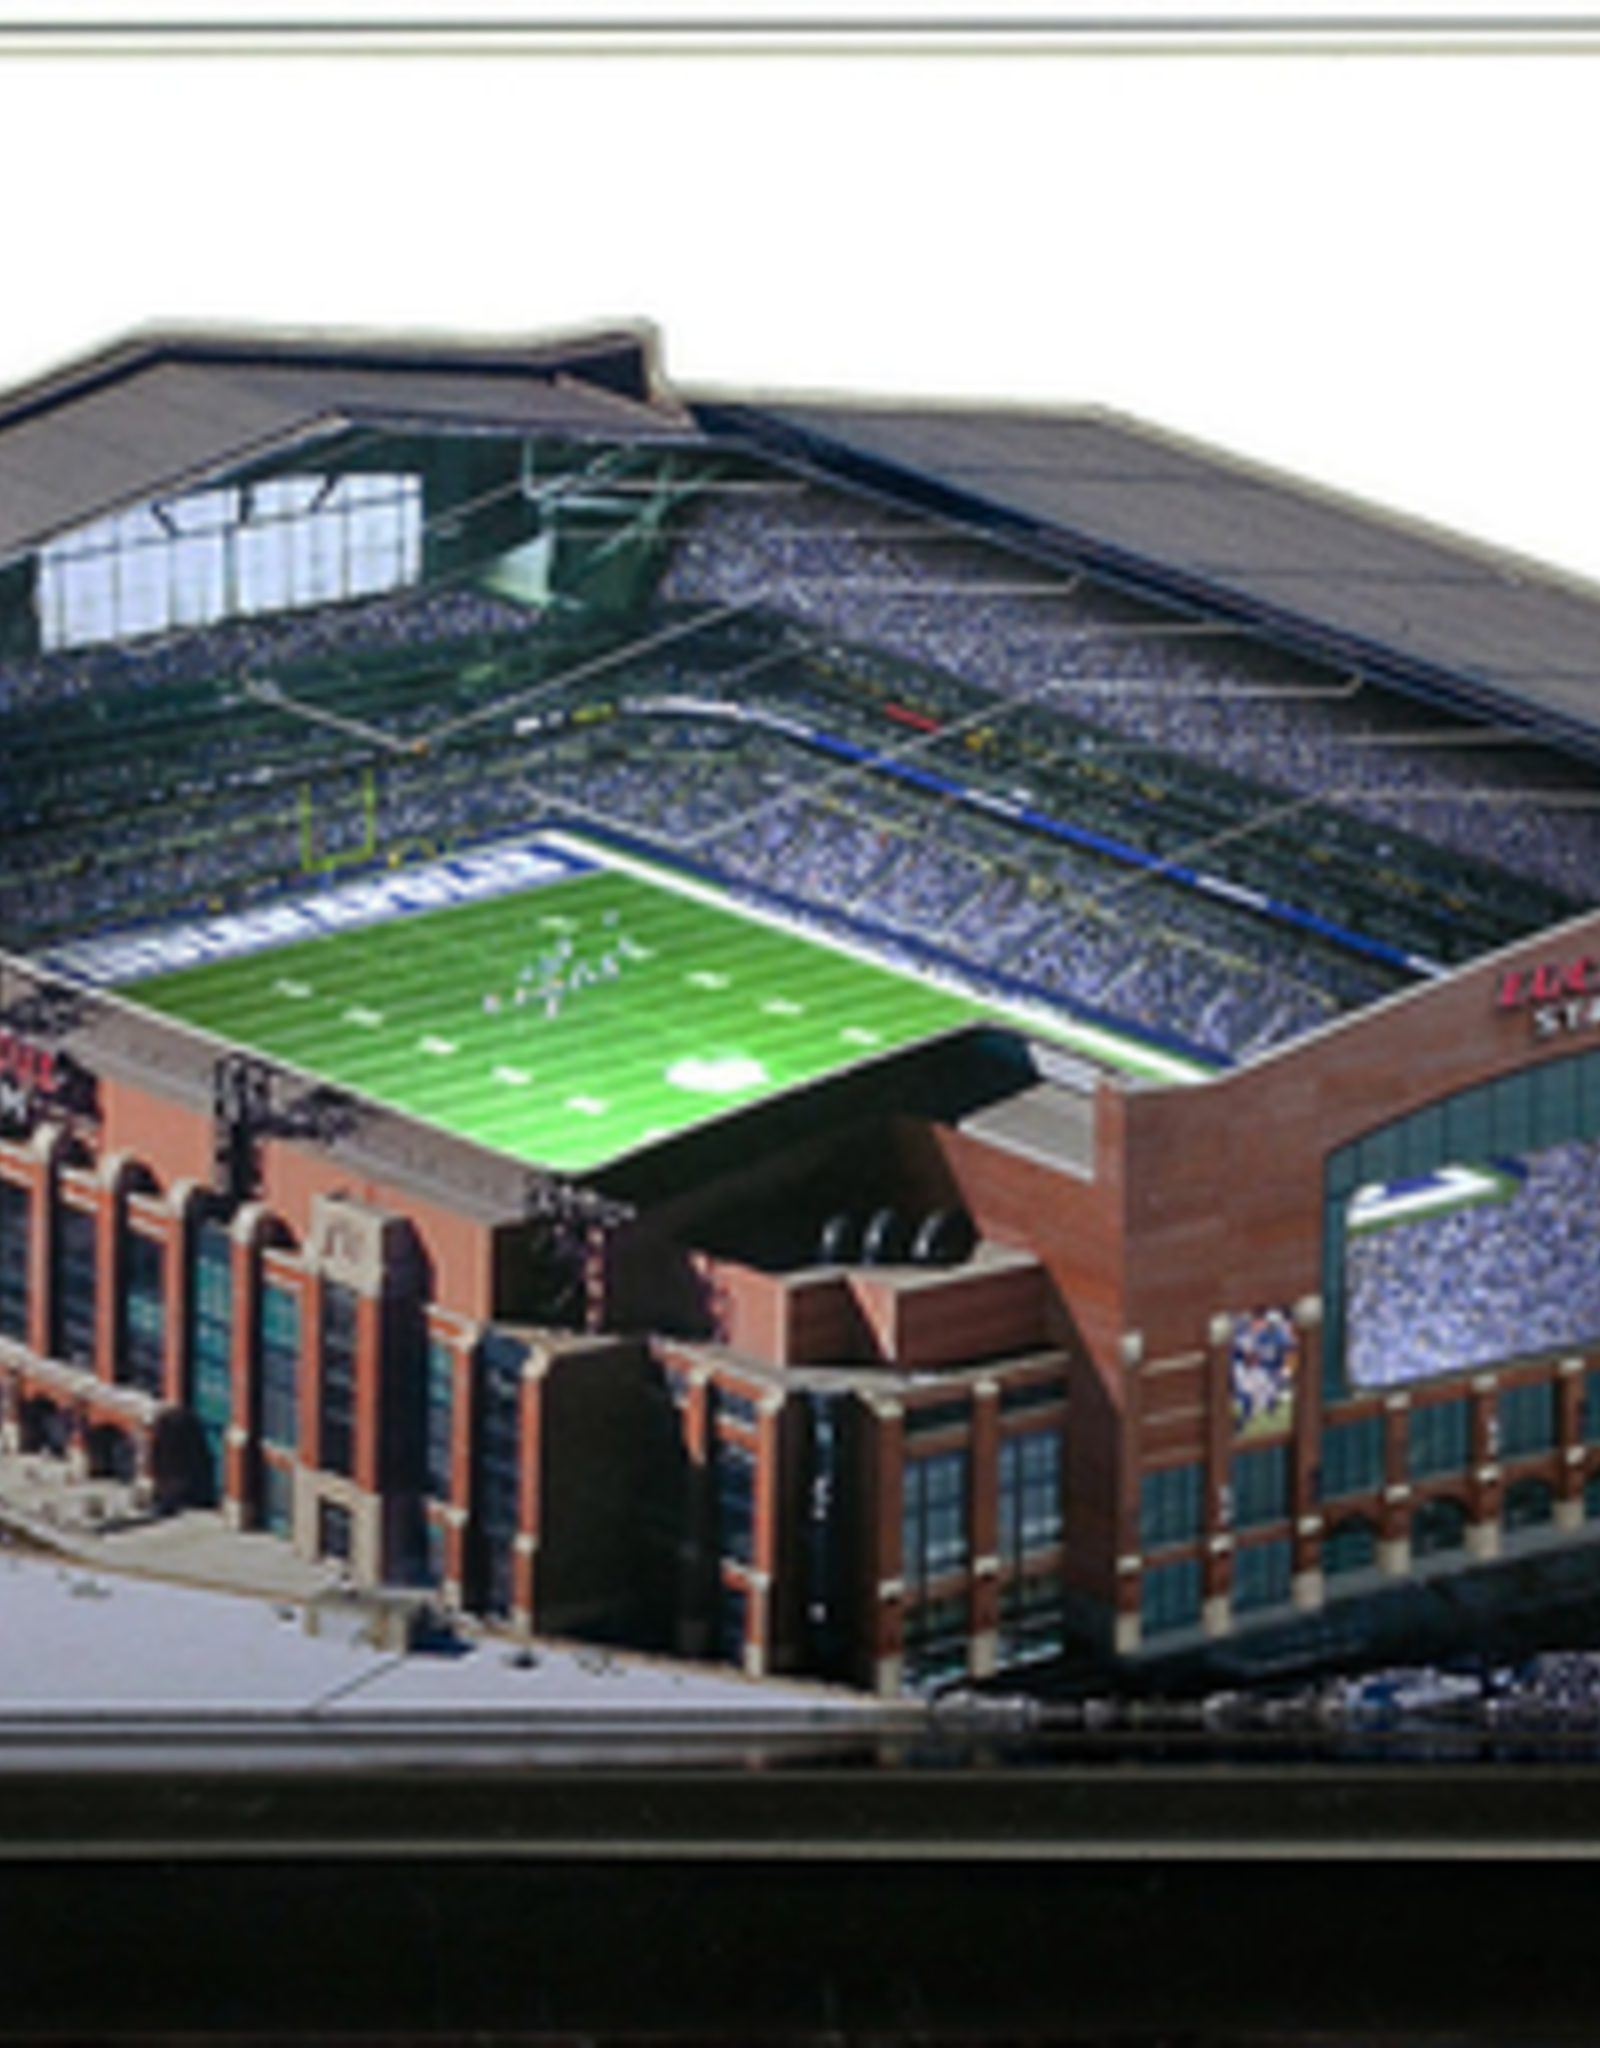 HOMEFIELDS Colts HomeField - Lucas Oil Stadium 19IN